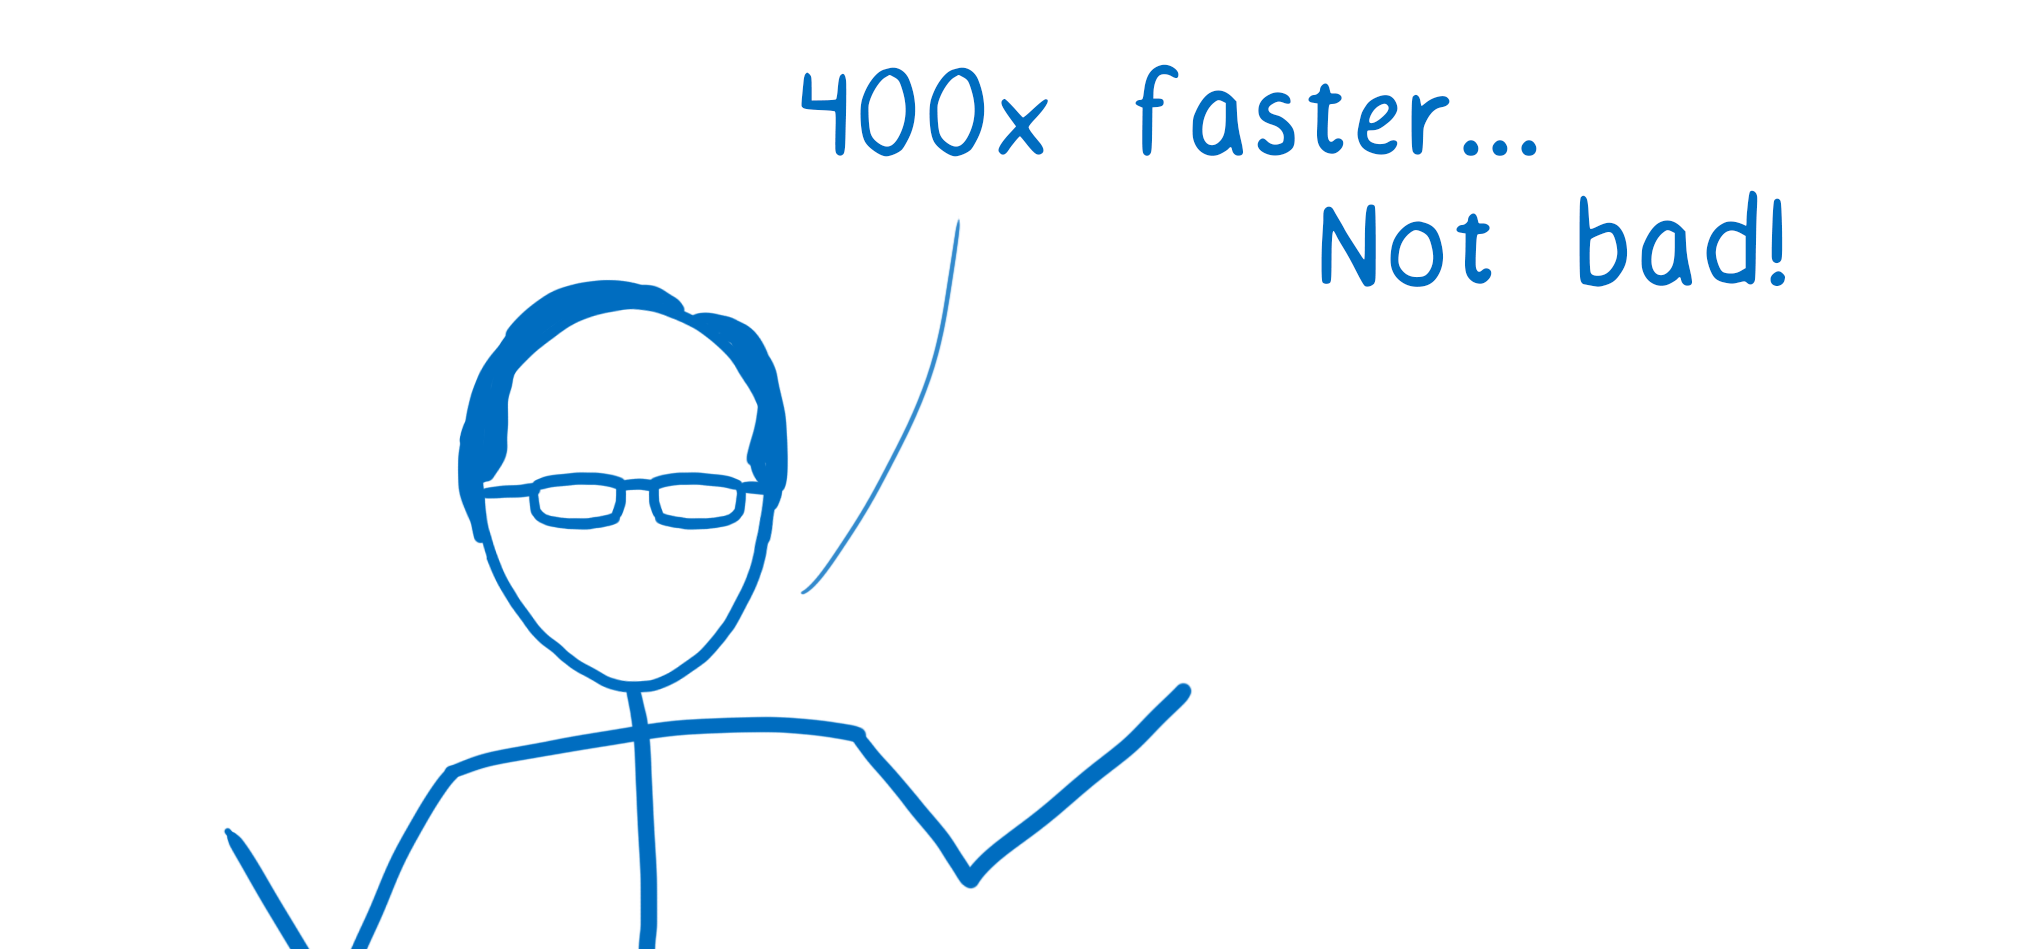 A person saying '400 times faster... not bad!'